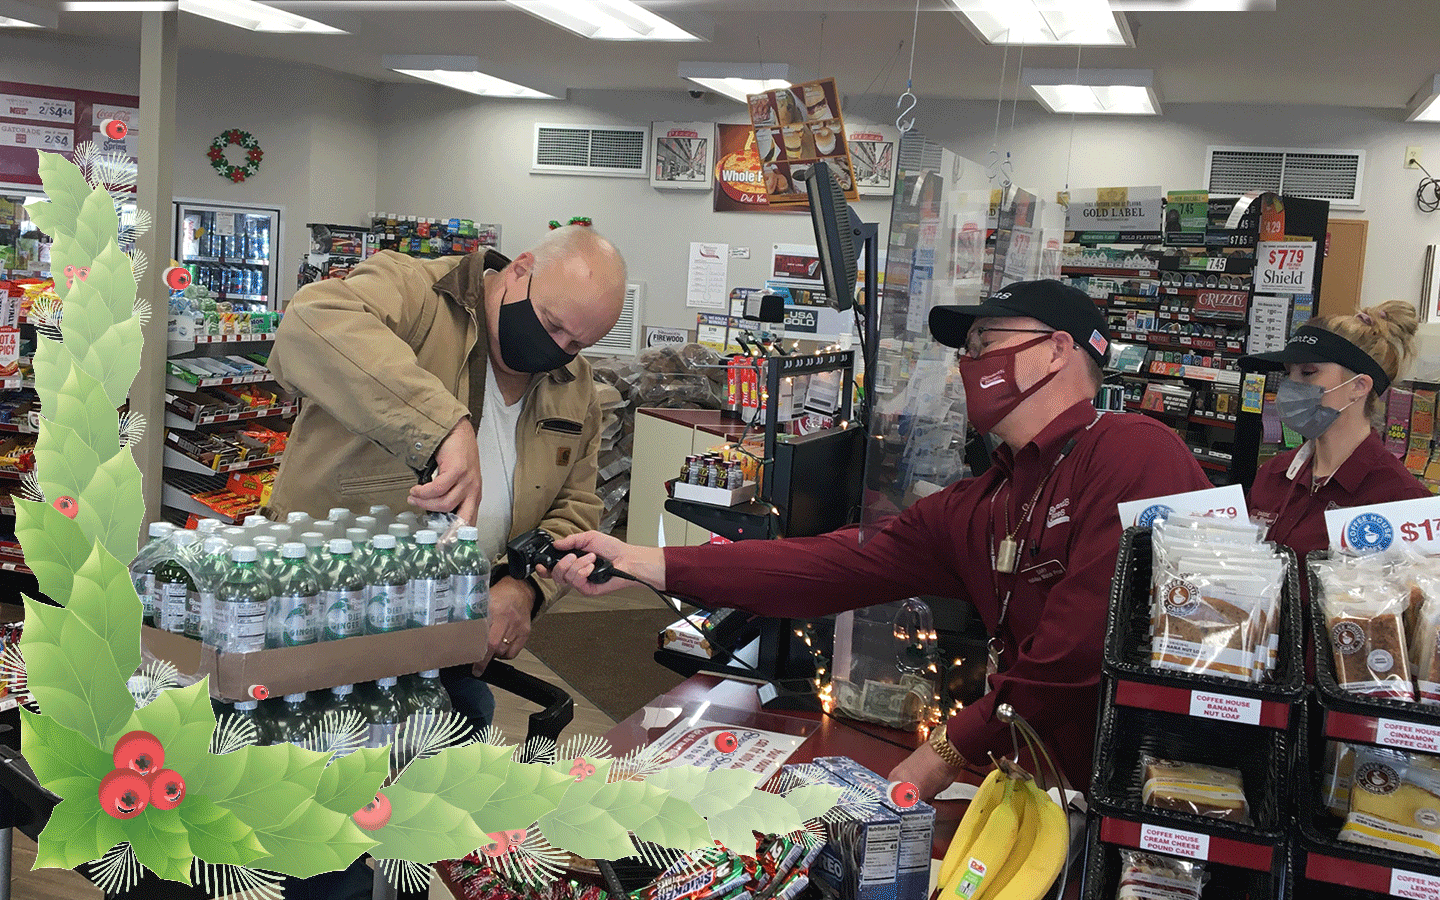 a customer buying a case of soda. The president of stewarts shops, Gary Dake, using the register to check him out.